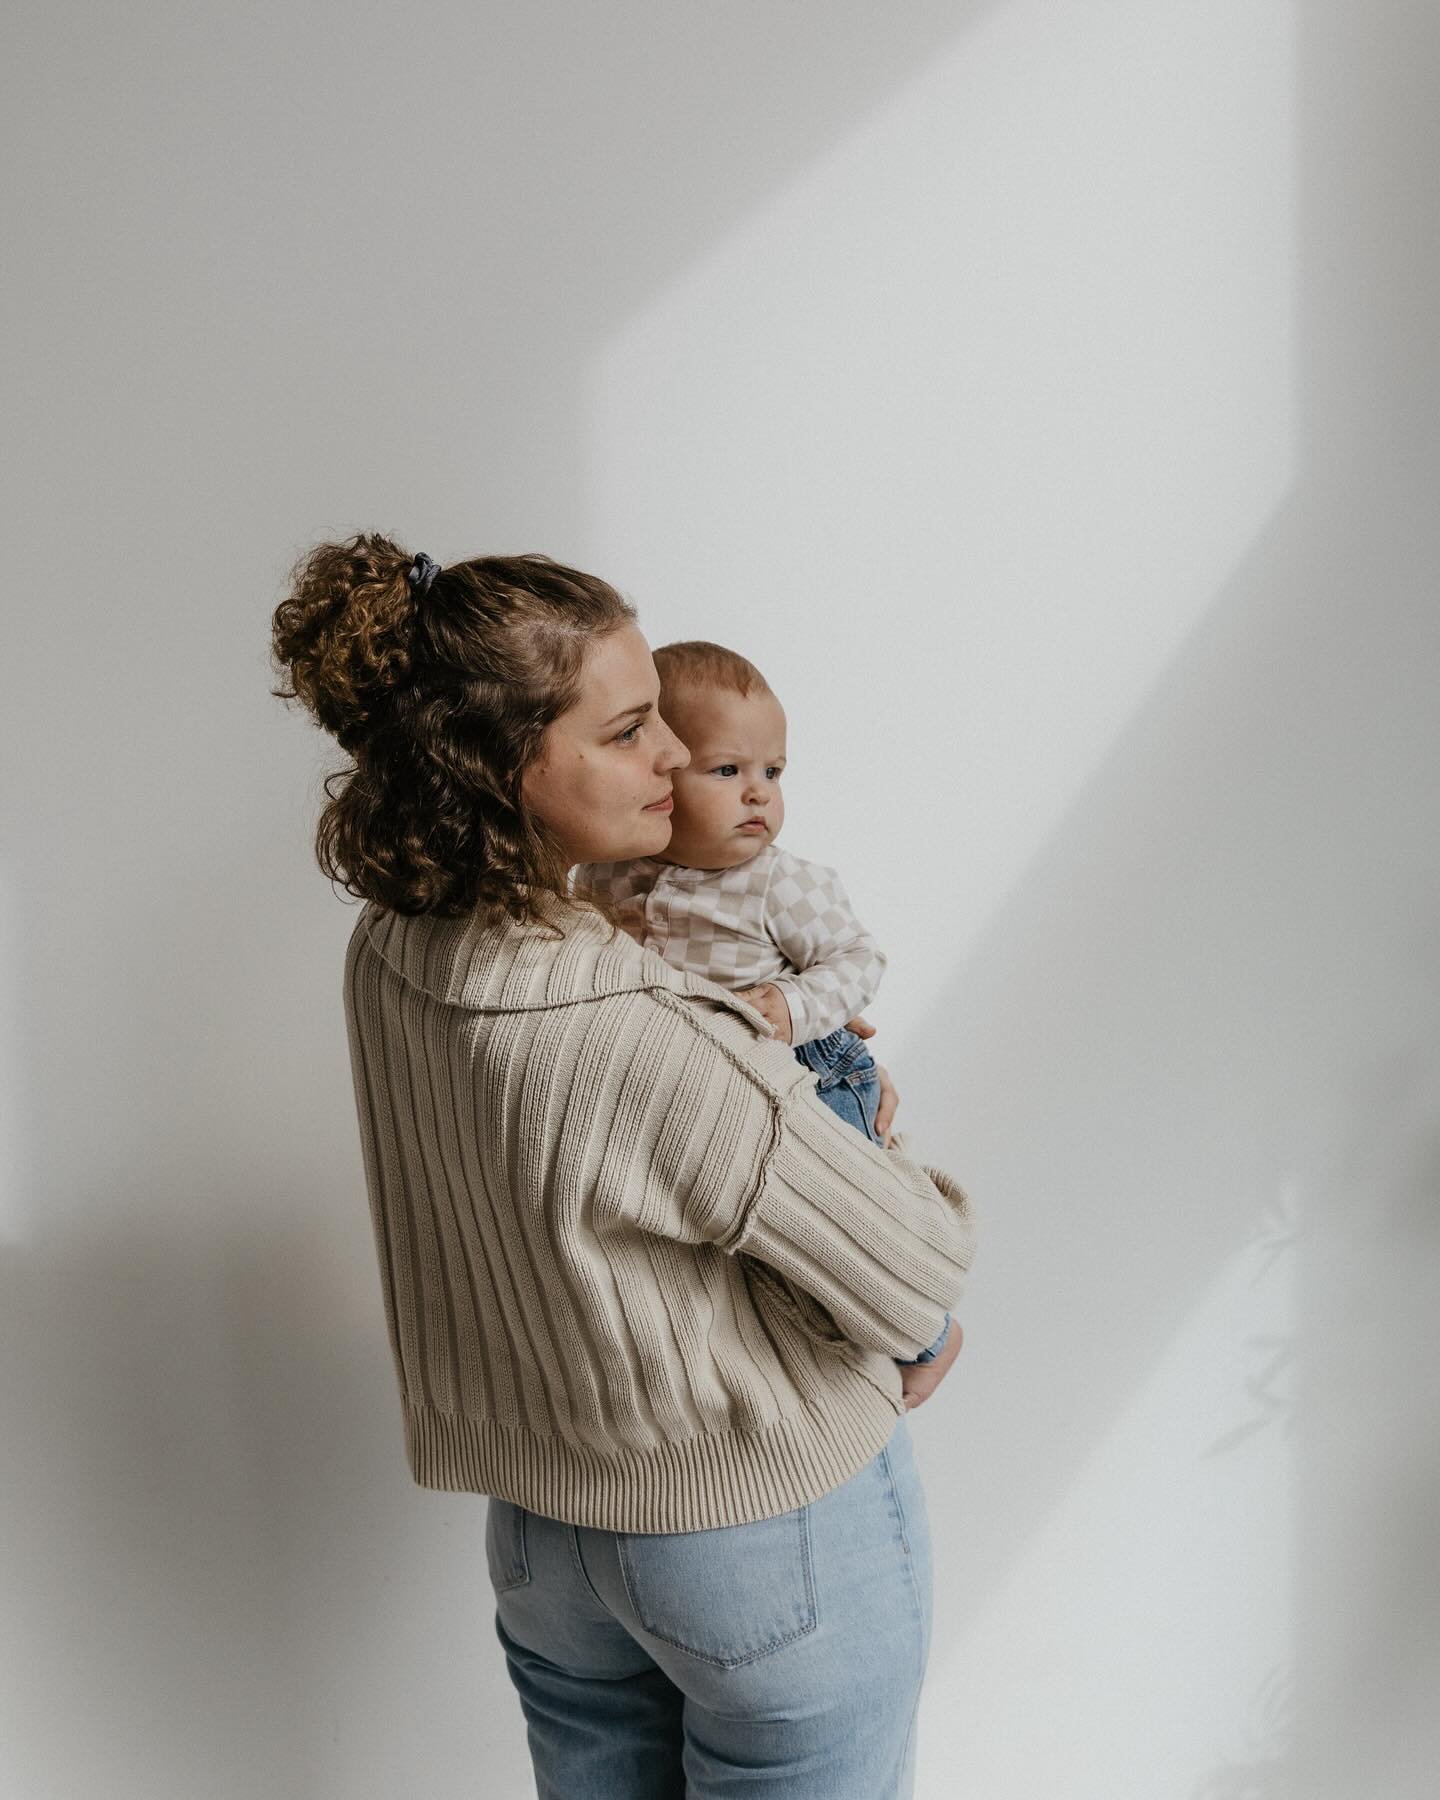 Motherhood. 
My sweet Ellis is 7 months old today and I&rsquo;ve been reflecting on the experience that is becoming a mother. As you&rsquo;ve probably heard or experienced yourself &mdash; it&rsquo;s the most life-changing, rewarding, joyous, and ext